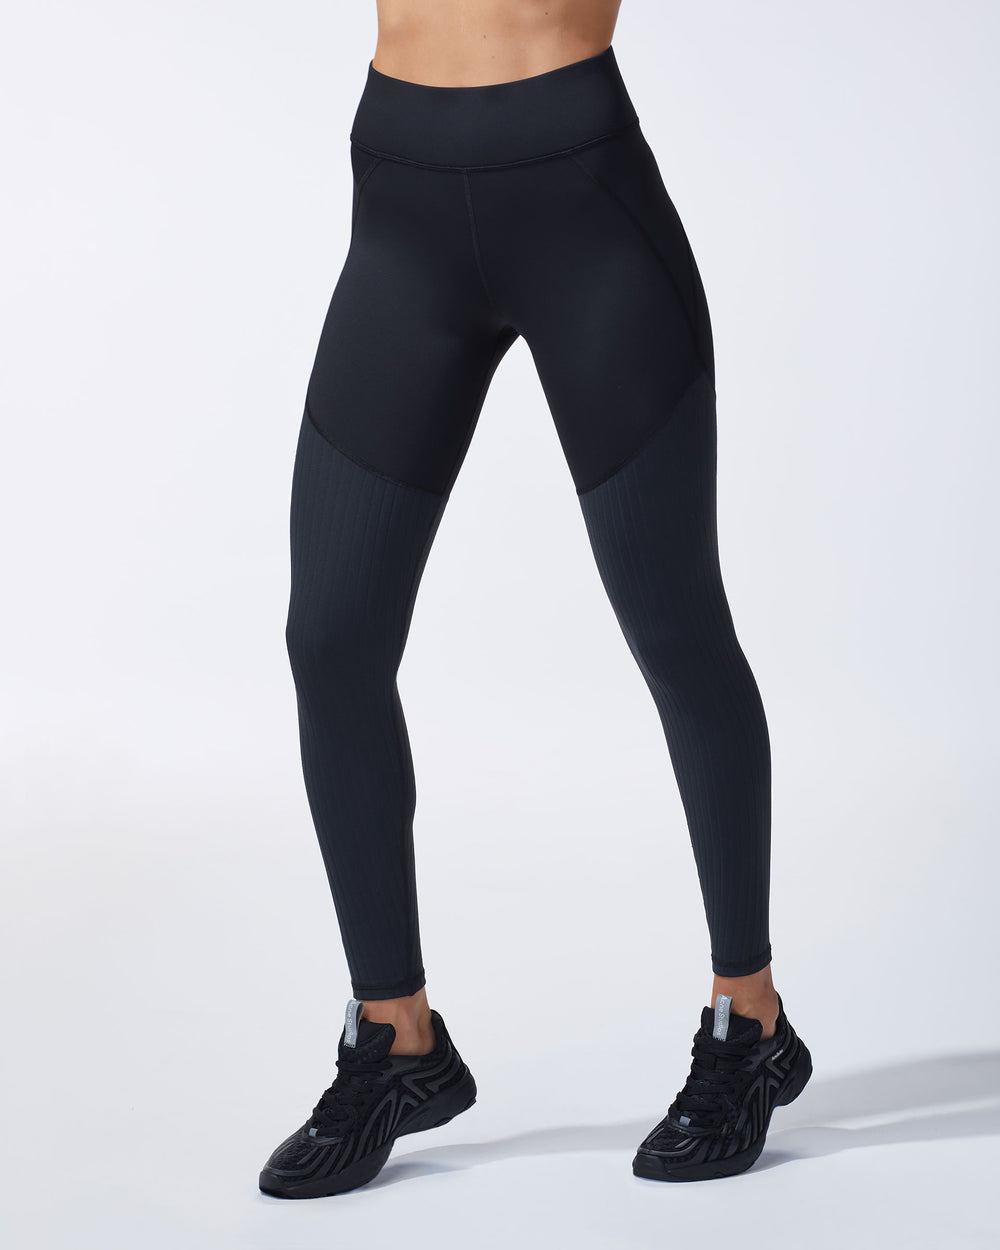 13 Best Squat-Proof Leggings, According to Professional Trainers | Glamour